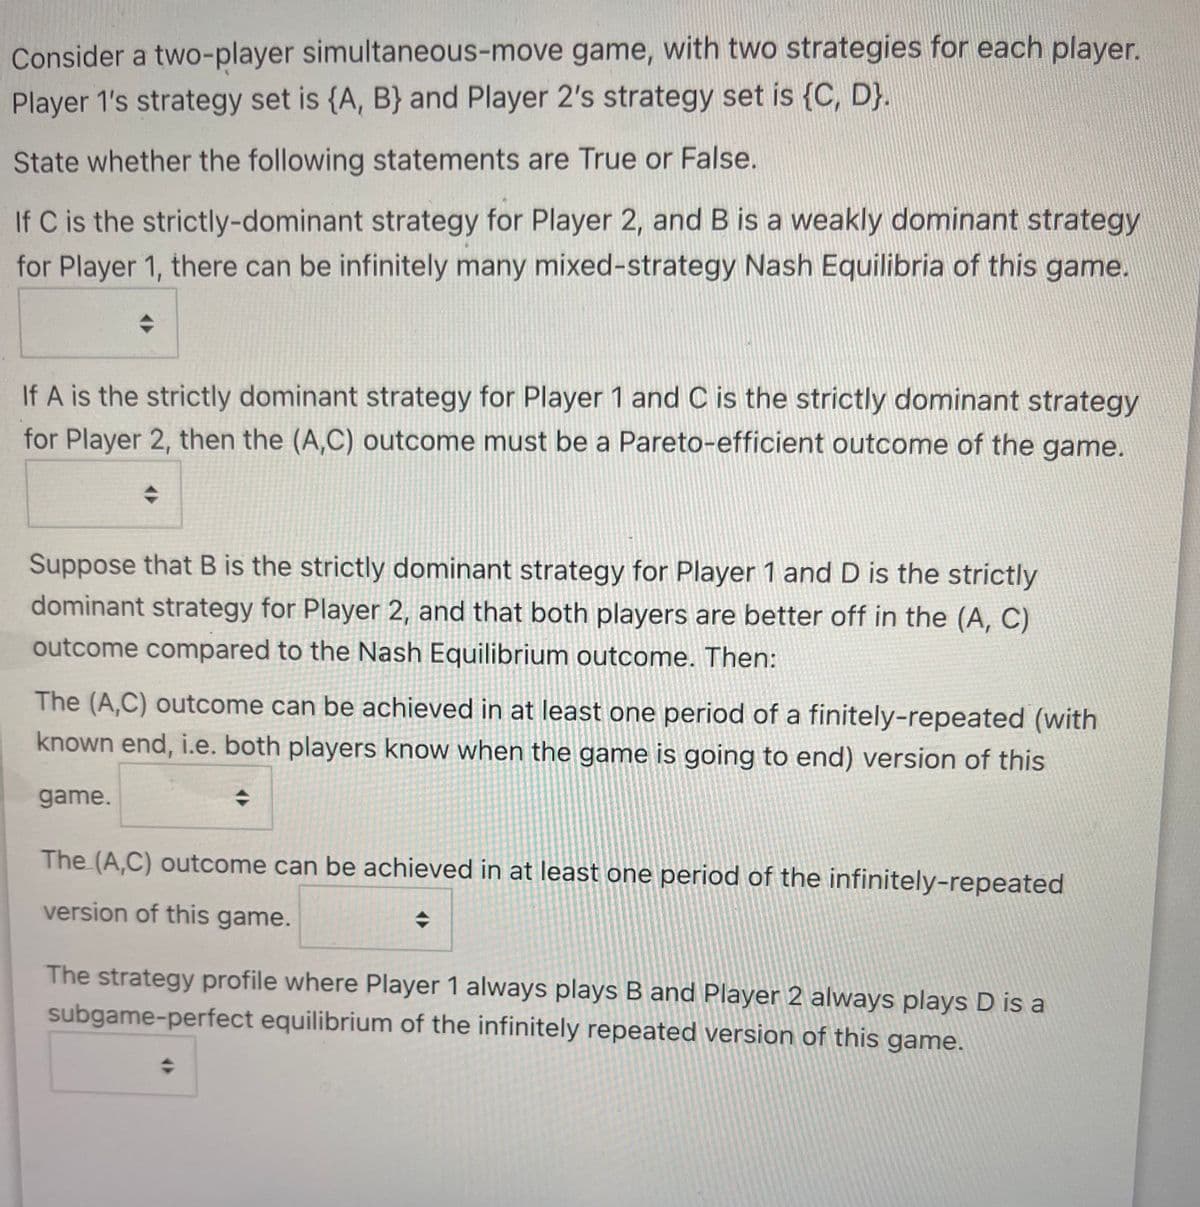 Consider a two-player simultaneous-move game, with two strategies for each player.
Player 1's strategy set is {A, B} and Player 2's strategy set is {C, D}.
State whether the following statements are True or False.
If C is the strictly-dominant strategy for Player 2, and B is a weakly dominant strategy
for Player 1, there can be infinitely many mixed-strategy Nash Equilibria of this game.
If A is the strictly dominant strategy for Player 1 and C is the strictly dominant strategy
for Player 2, then the (A,C) outcome must be a Pareto-efficient outcome of the game.
Suppose that B is the strictly dominant strategy for Player 1 and D is the strictly
dominant strategy for Player 2, and that both players are better off in the (A, C)
outcome compared to the Nash Equilibrium outcome. Then:
The (A,C) outcome can be achieved in at least one period of a finitely-repeated (with
known end, i.e. both players know when the game is going to end) version of this
game.
The (A,C) outcome can be achieved in at least one period of the infinitely-repeated
version of this game.
The strategy profile where Player 1 always plays B and Player 2 always plays D is a
subgame-perfect equilibrium of the infinitely repeated version of this game.
